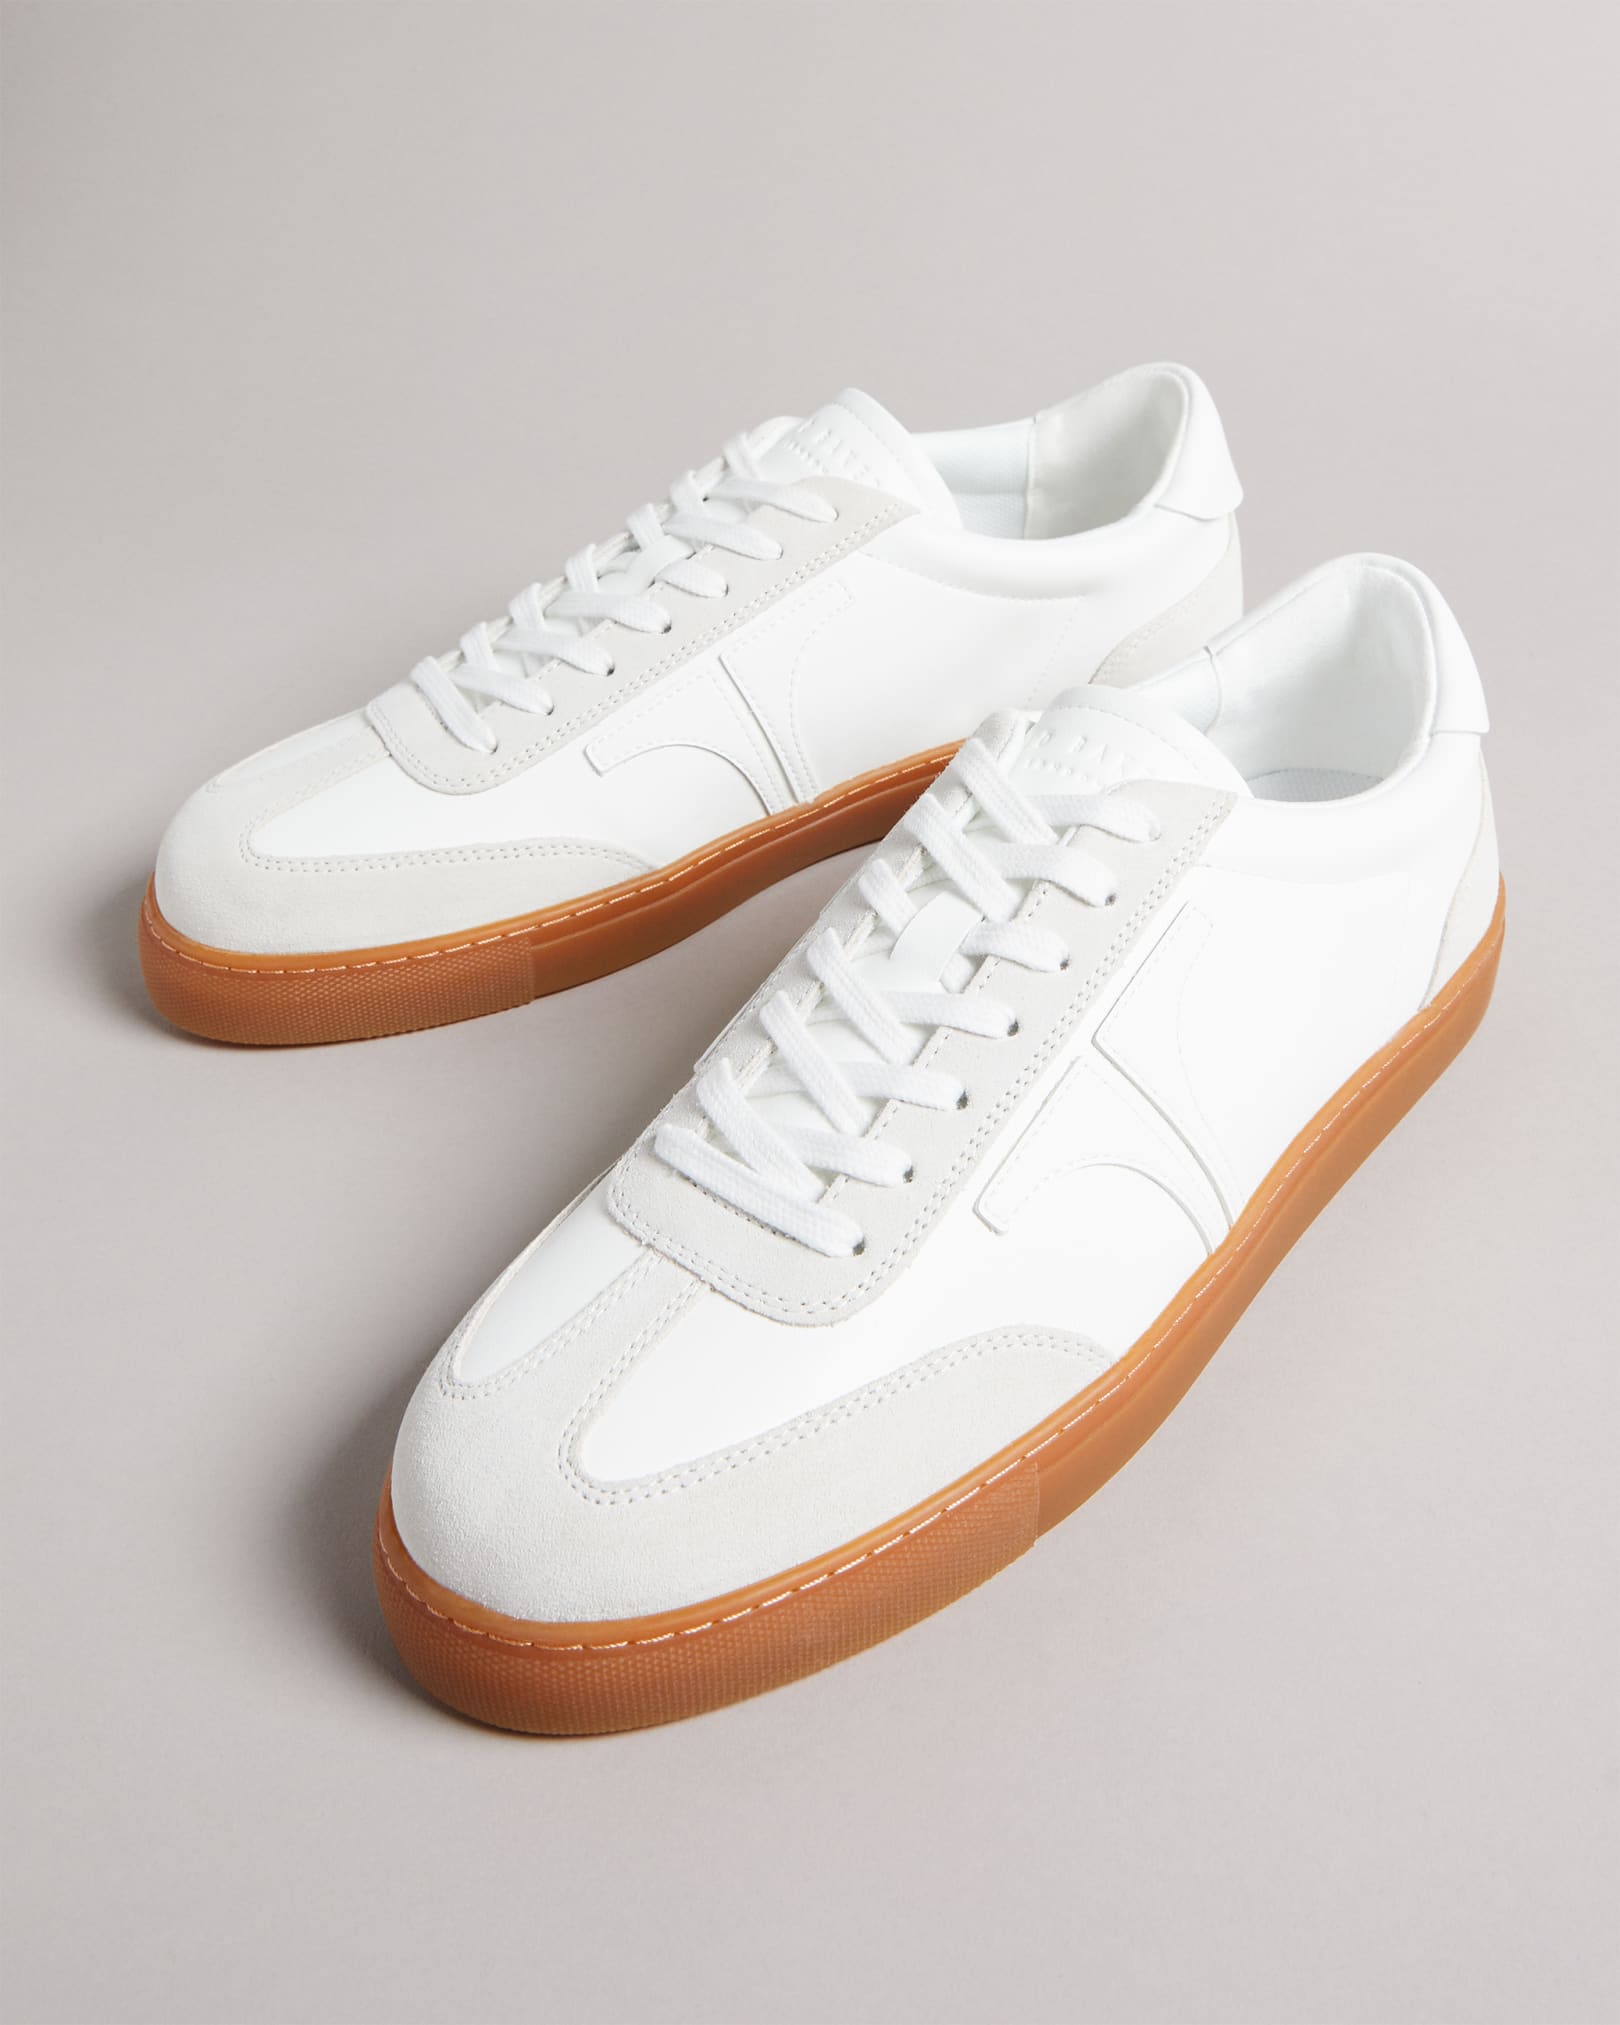 ROBBERT Retro Suede Leather Mix Trainers in White